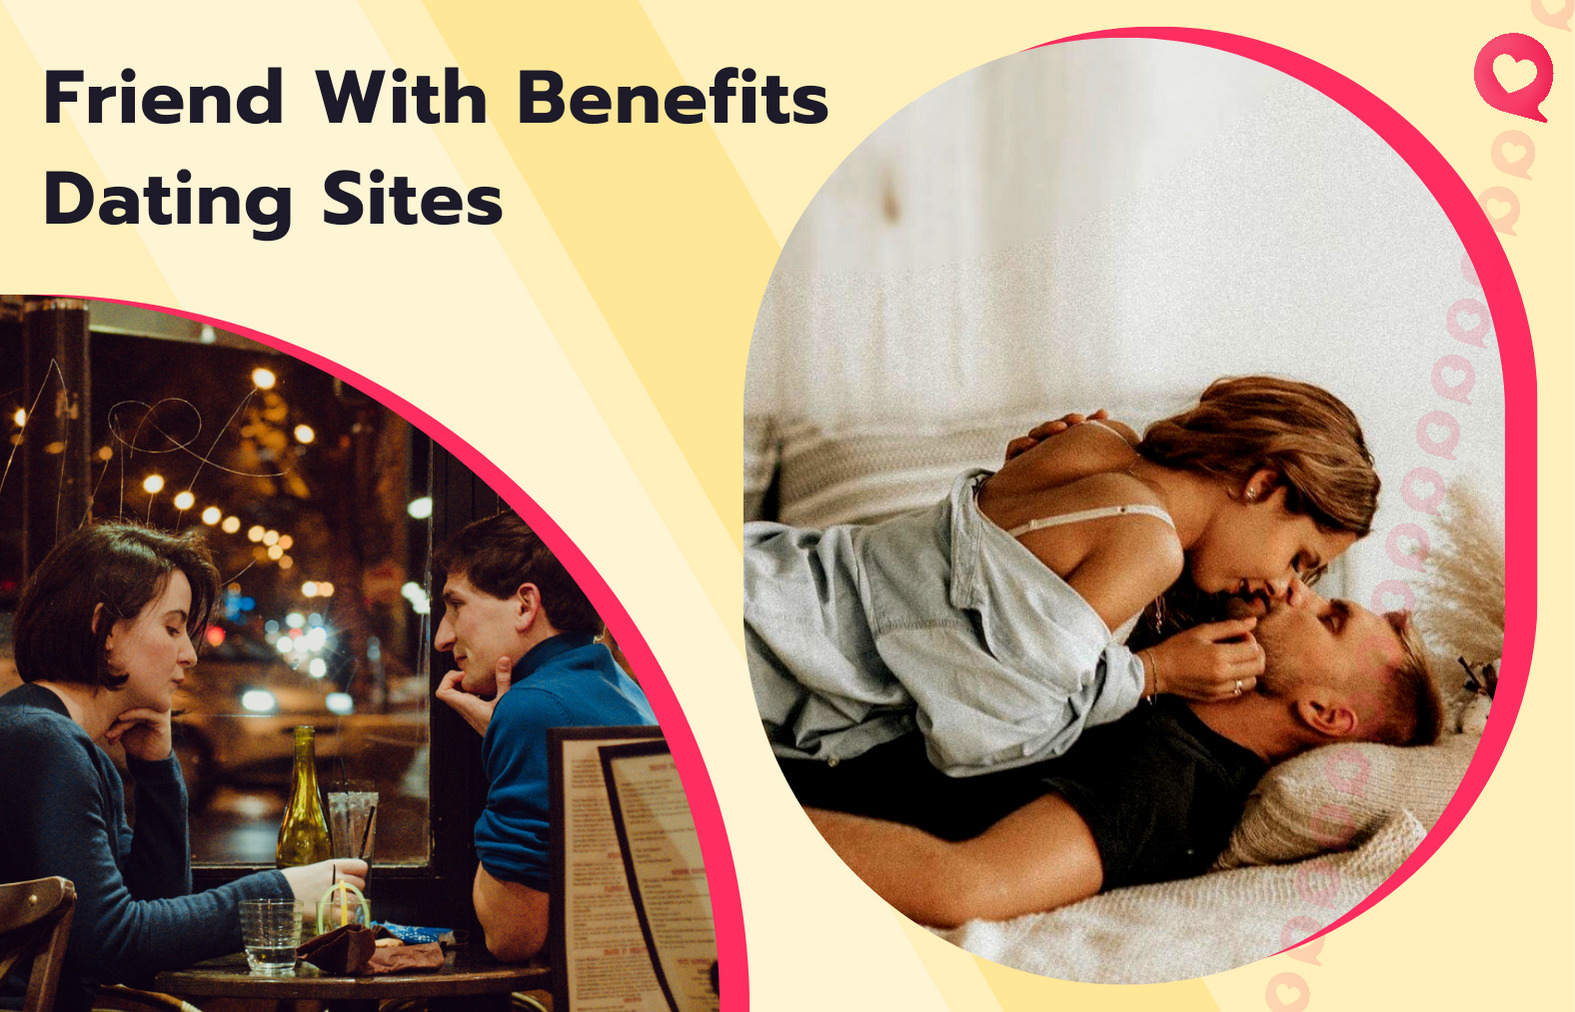 Top 6 Friends With Benefits Sites - The Best FWB Sites & Apps